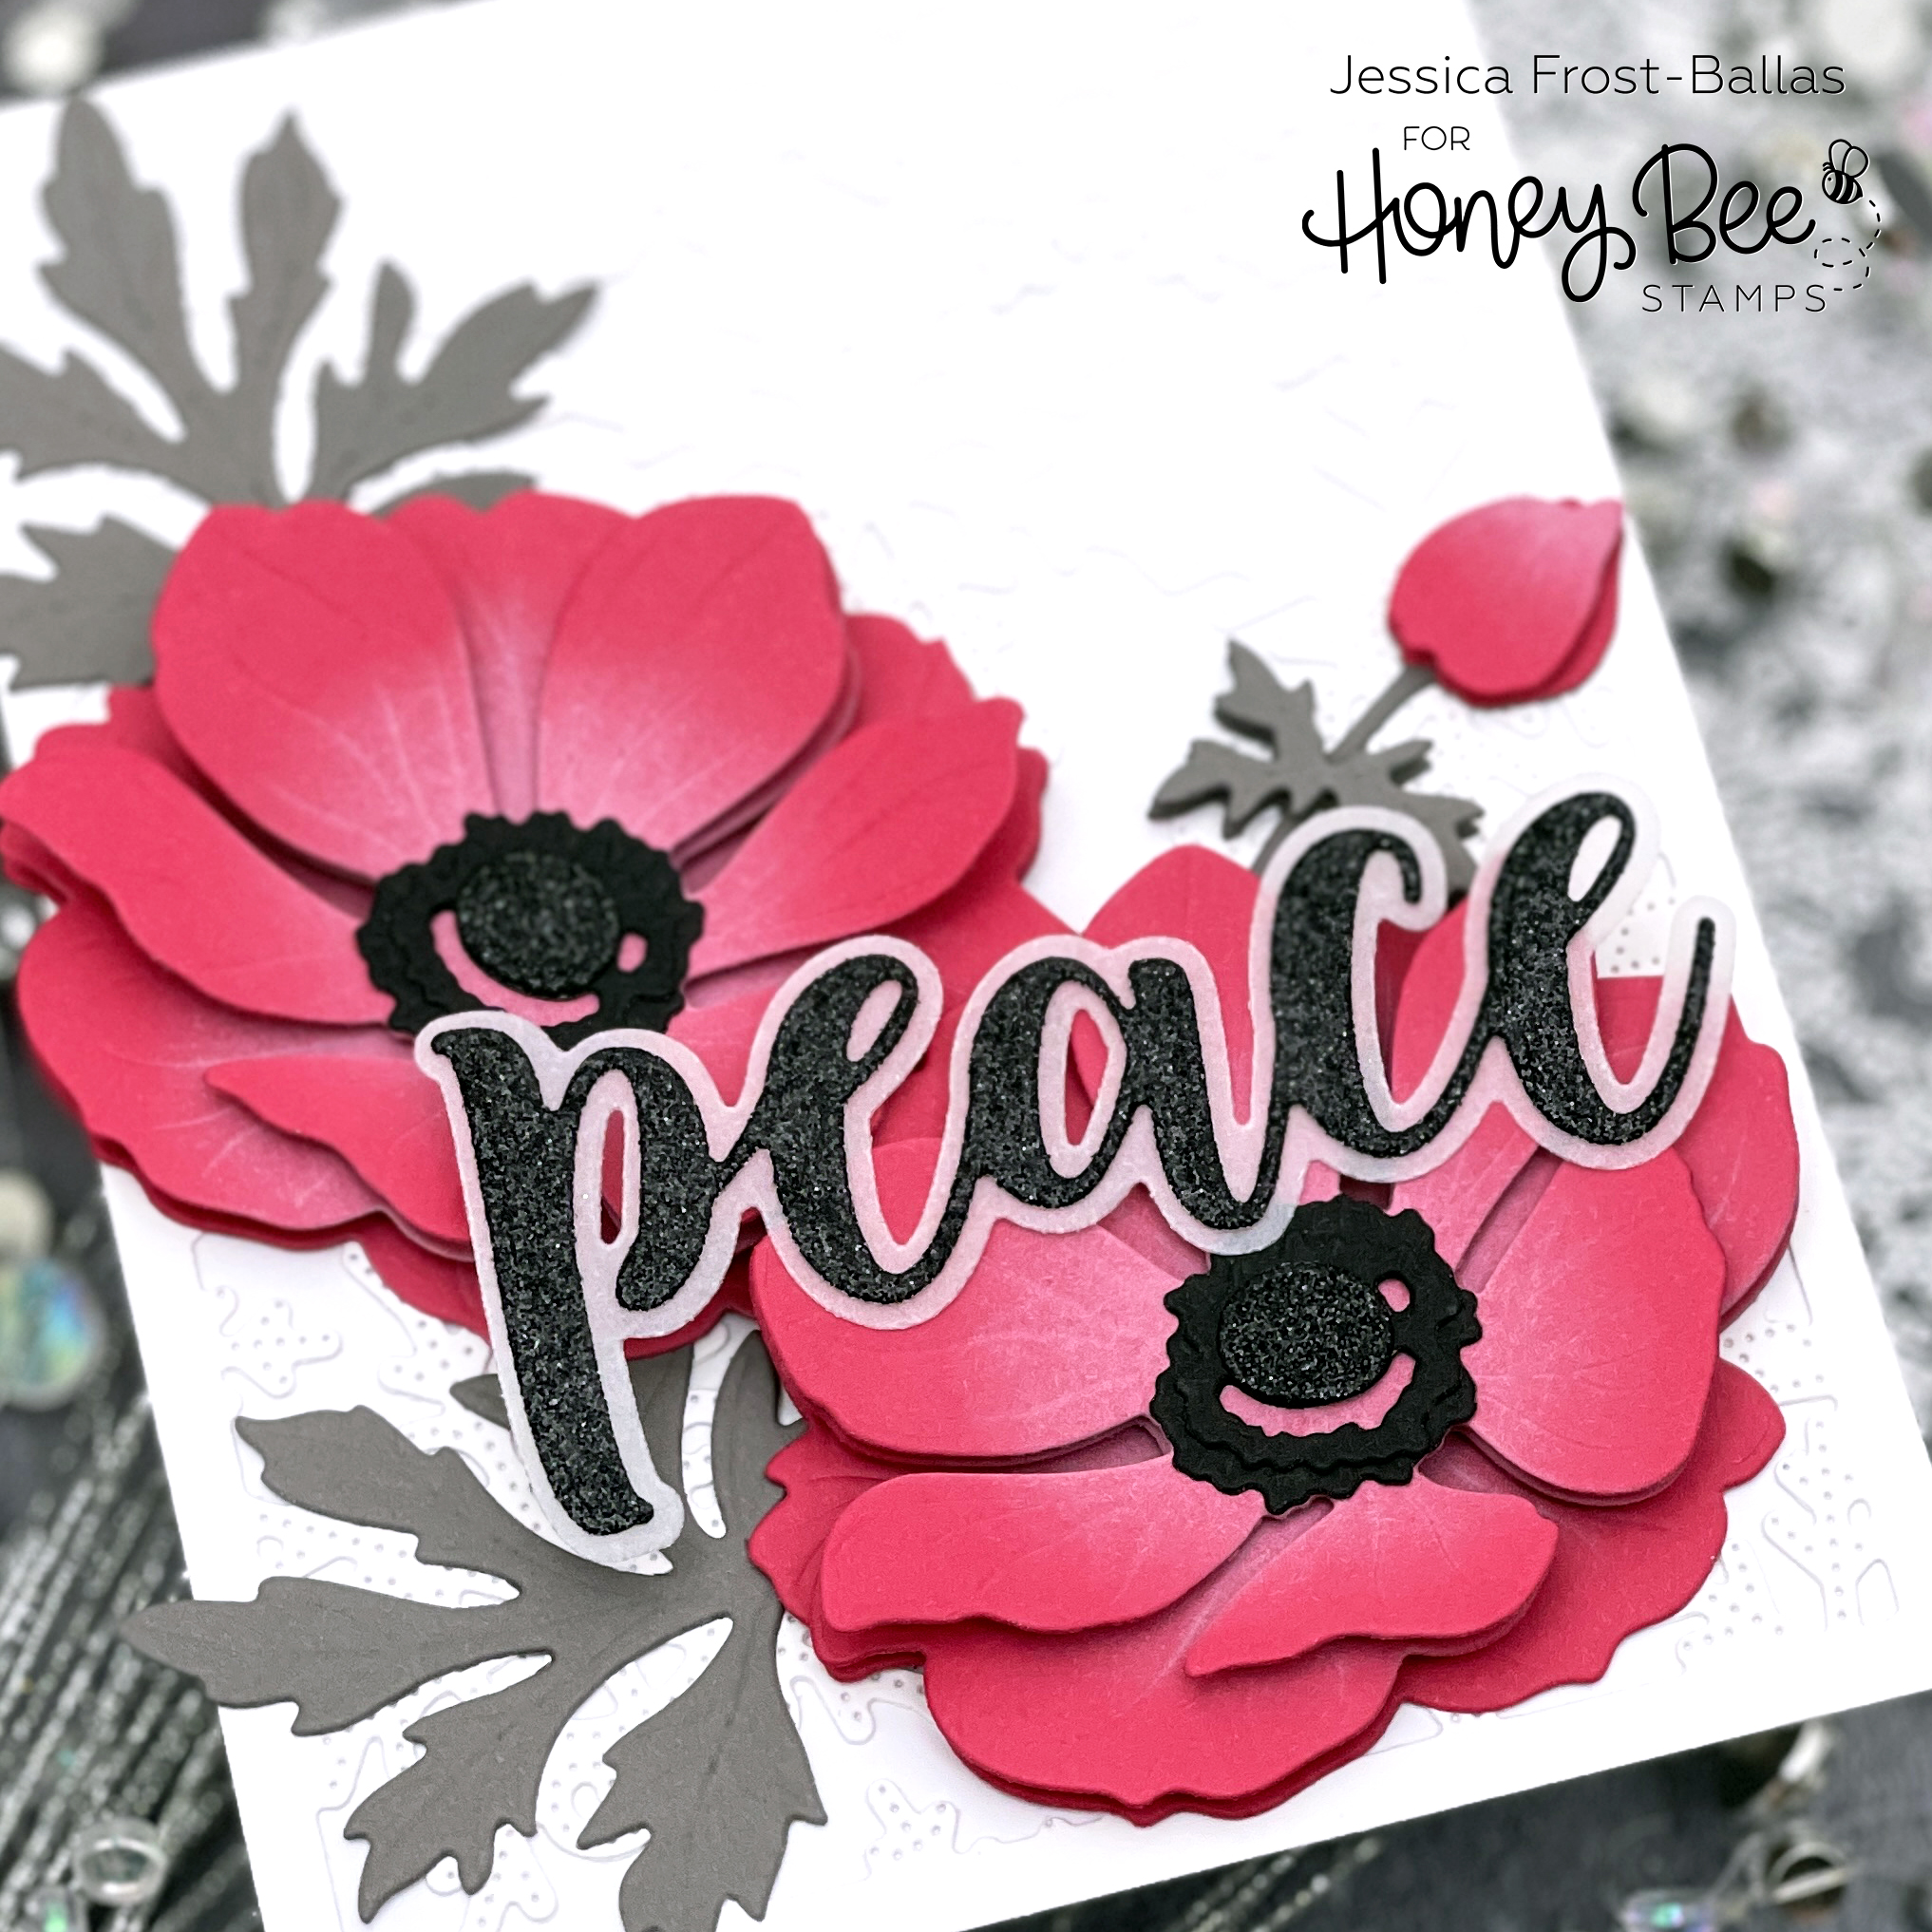 Lovely Layers Anemone by Jessica Frost-Ballas for Honey Bee Stamps